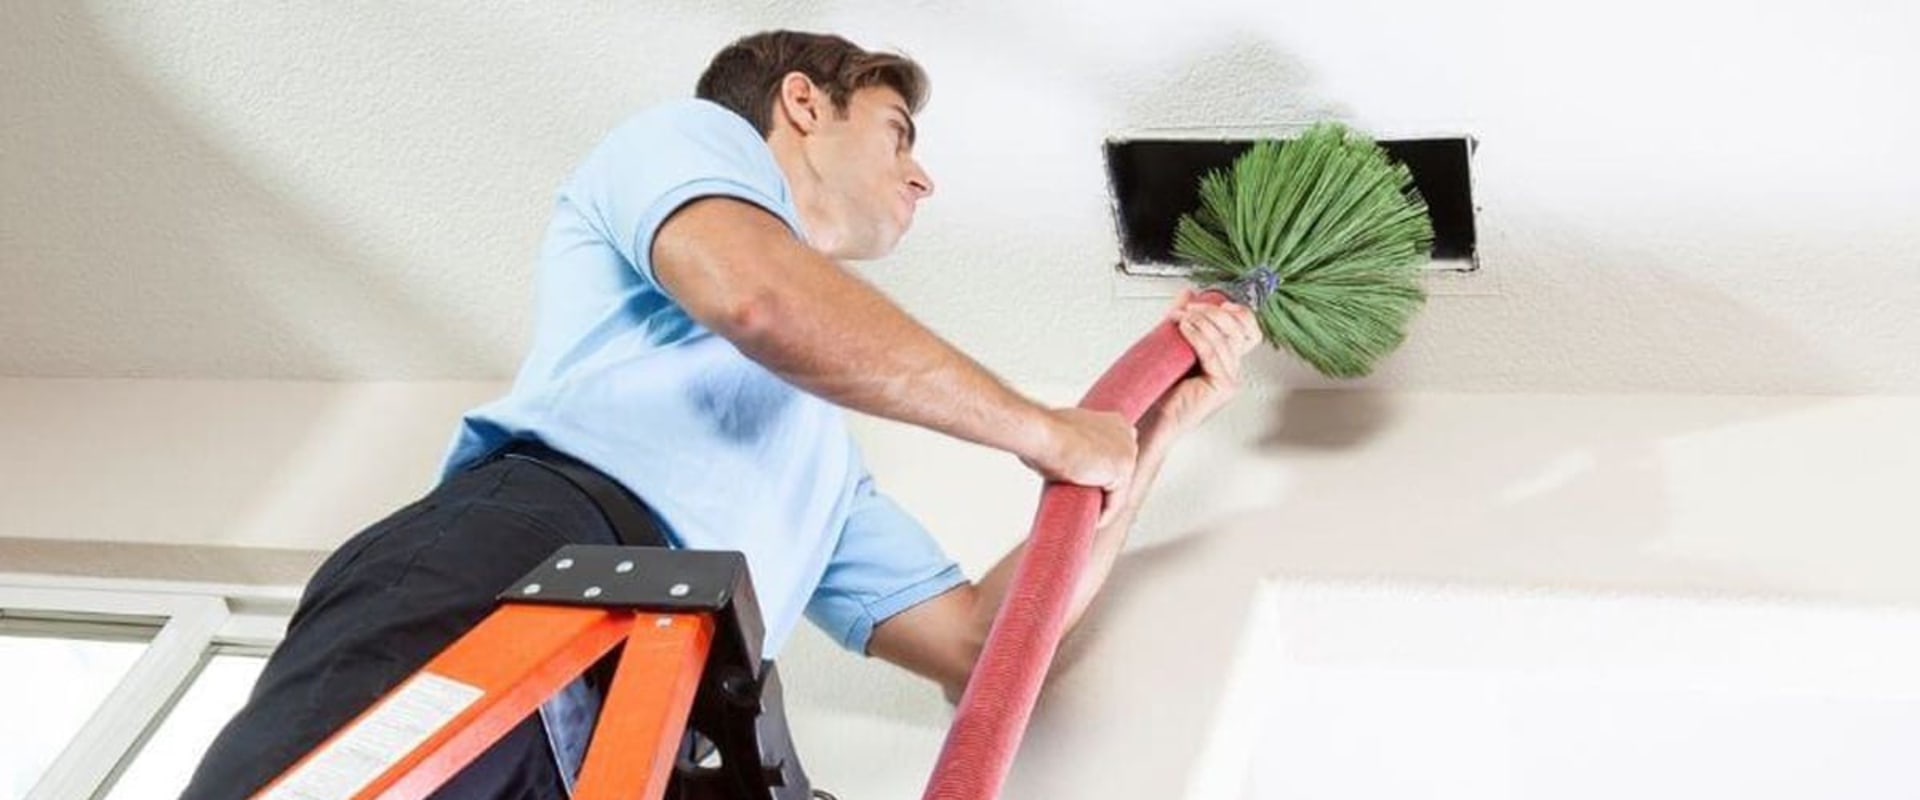 Do I Need a License to Clean Air Ducts in Florida?